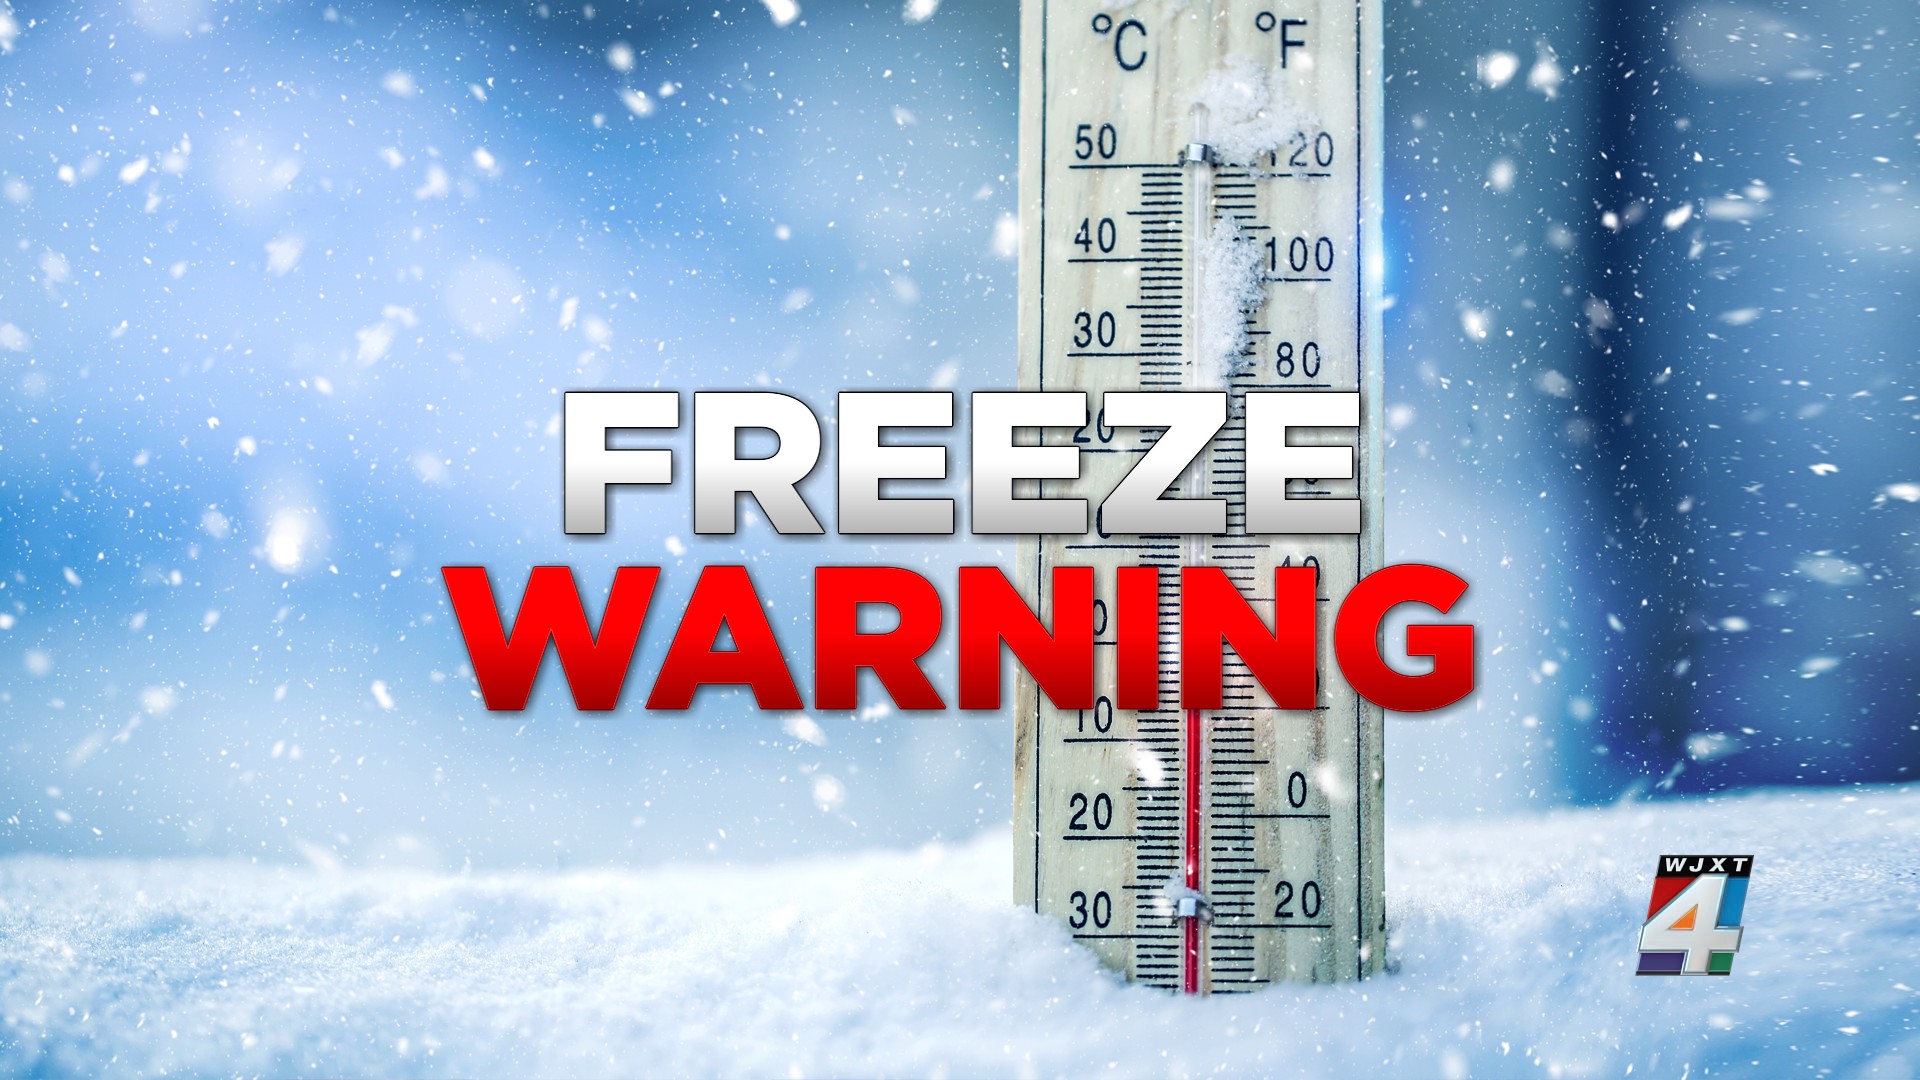 Temperatures dropping to freezing or sub-freezing levels Tuesday